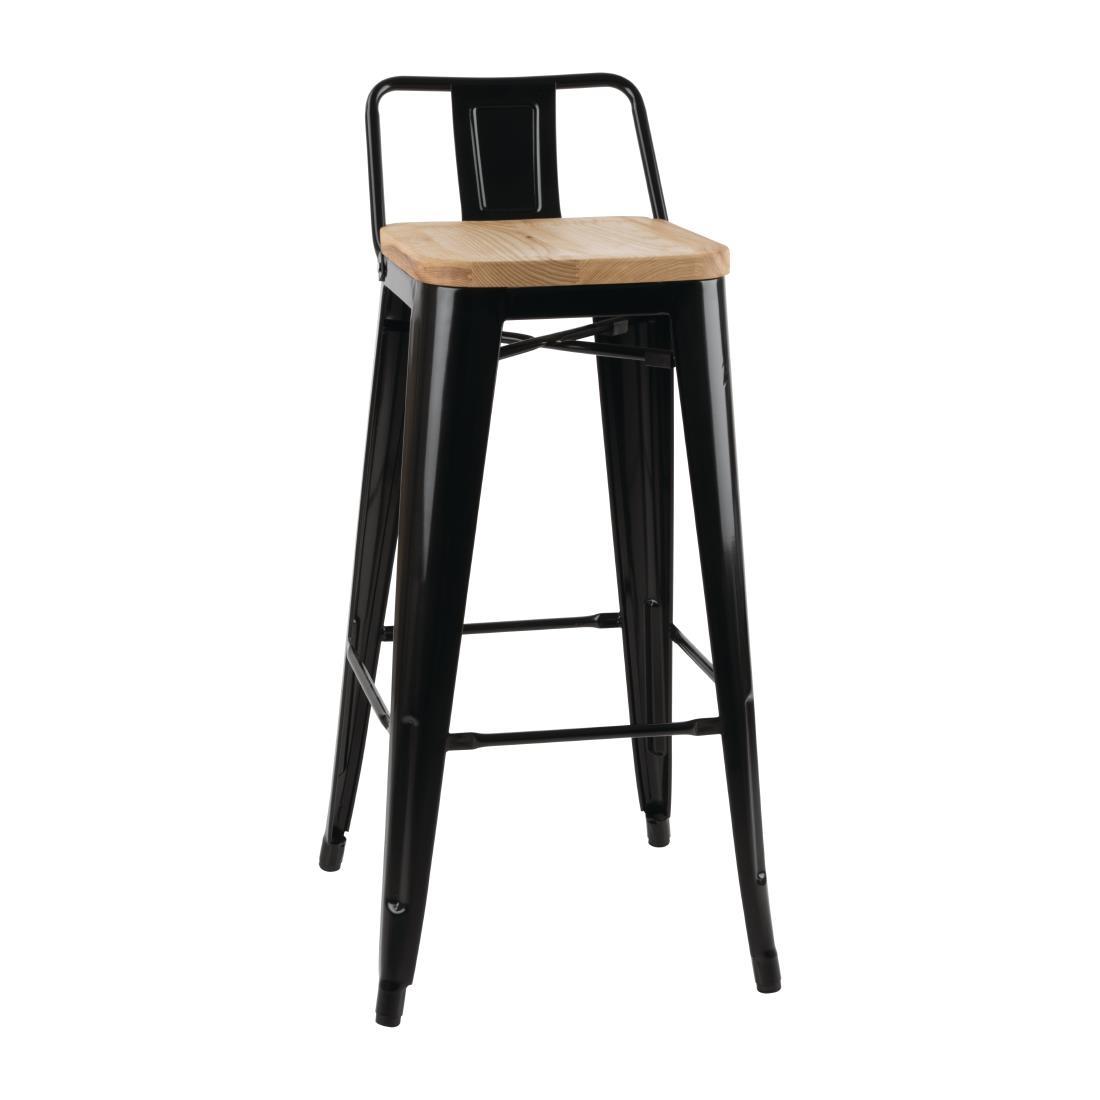 Bolero Bistro Backrest High Stools with Wooden Seat Pad Black (Pack of 4) - FB623  - 1